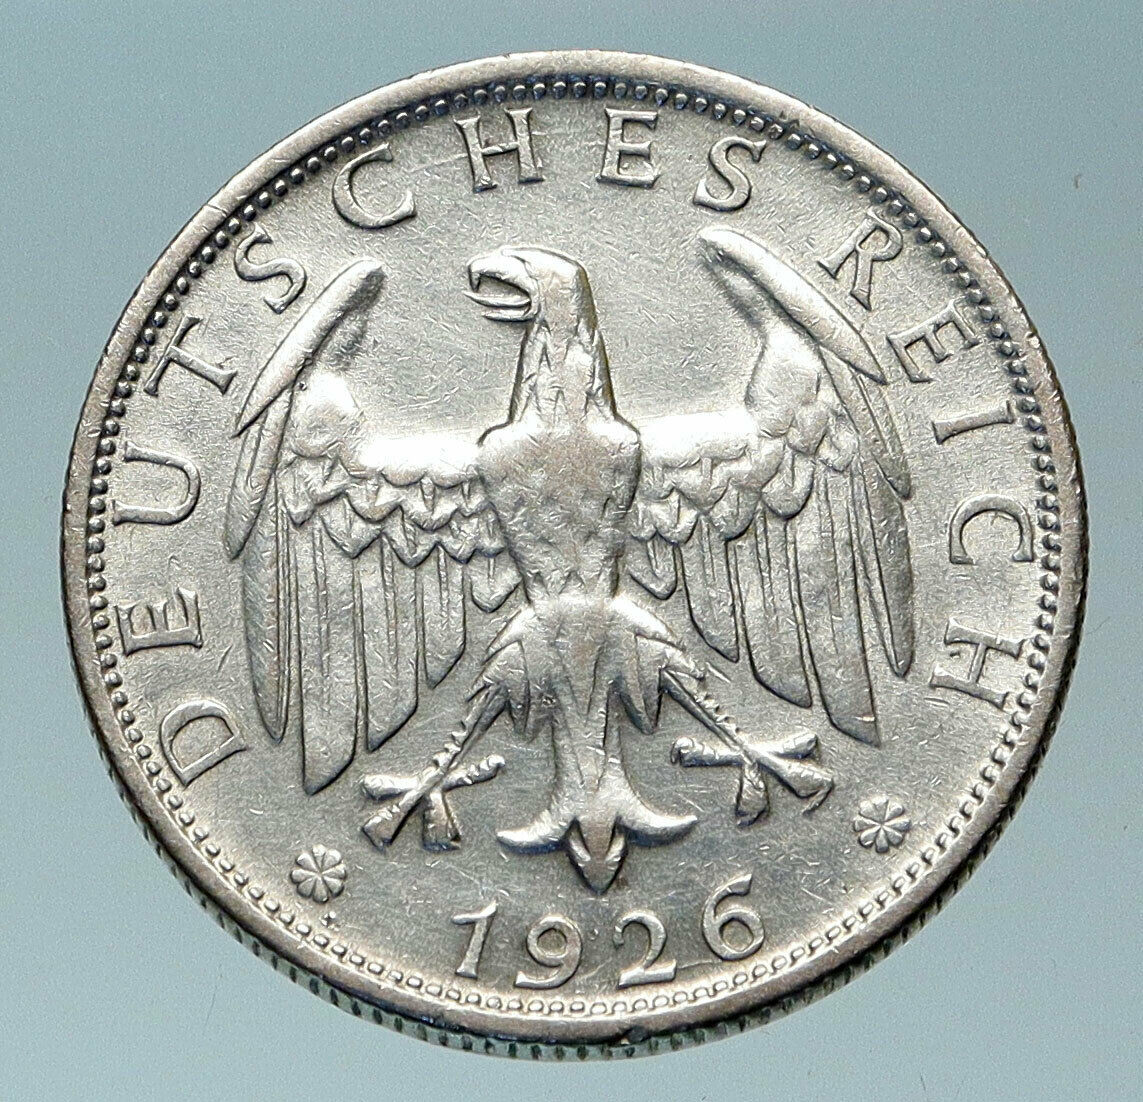 1926 D GERMANY Weimar Republic EAGLE Antique Silver 2 Mark German Coin i84382